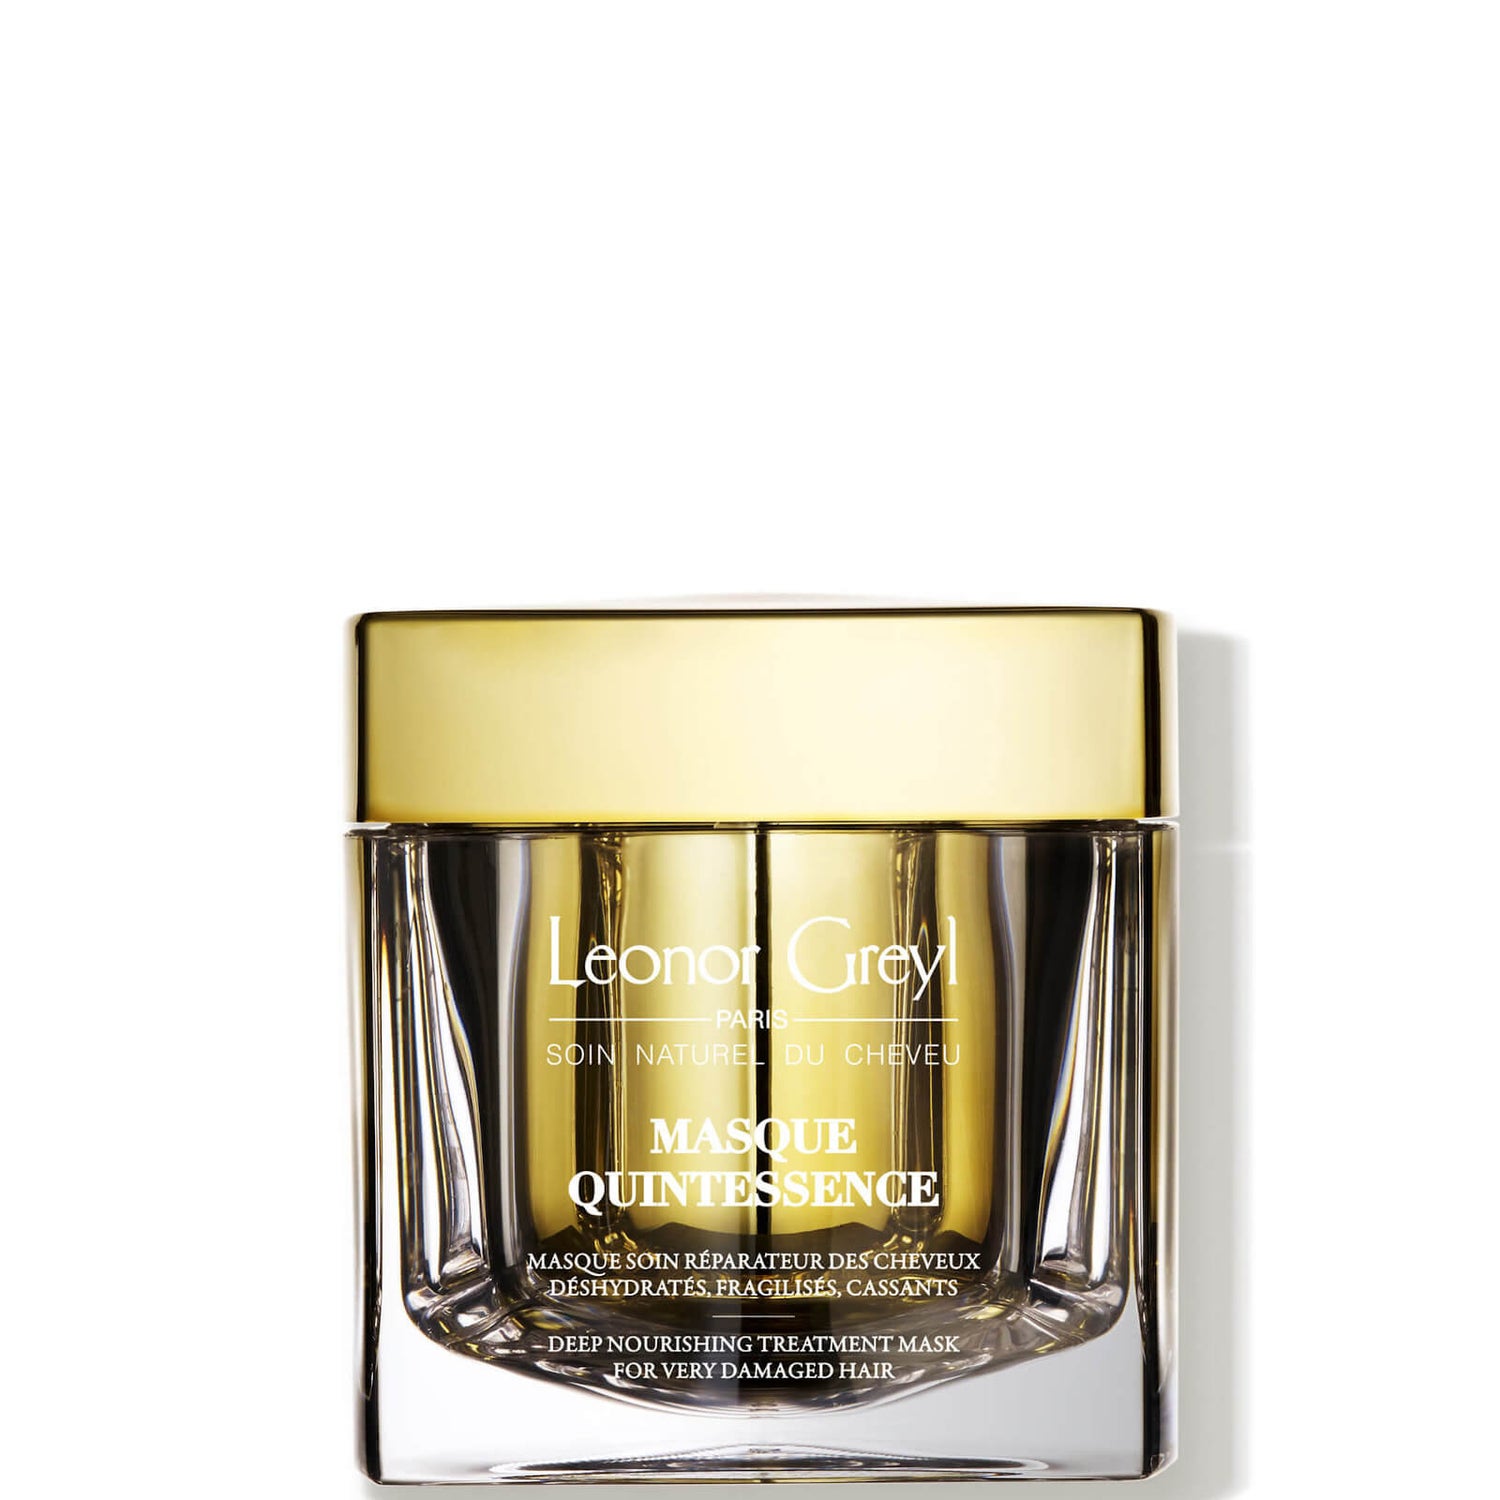 Leonor Grayl Masque Quintessence (Revitalizes, Regenerates, Repairs The Most Damaged And Dry Hair)